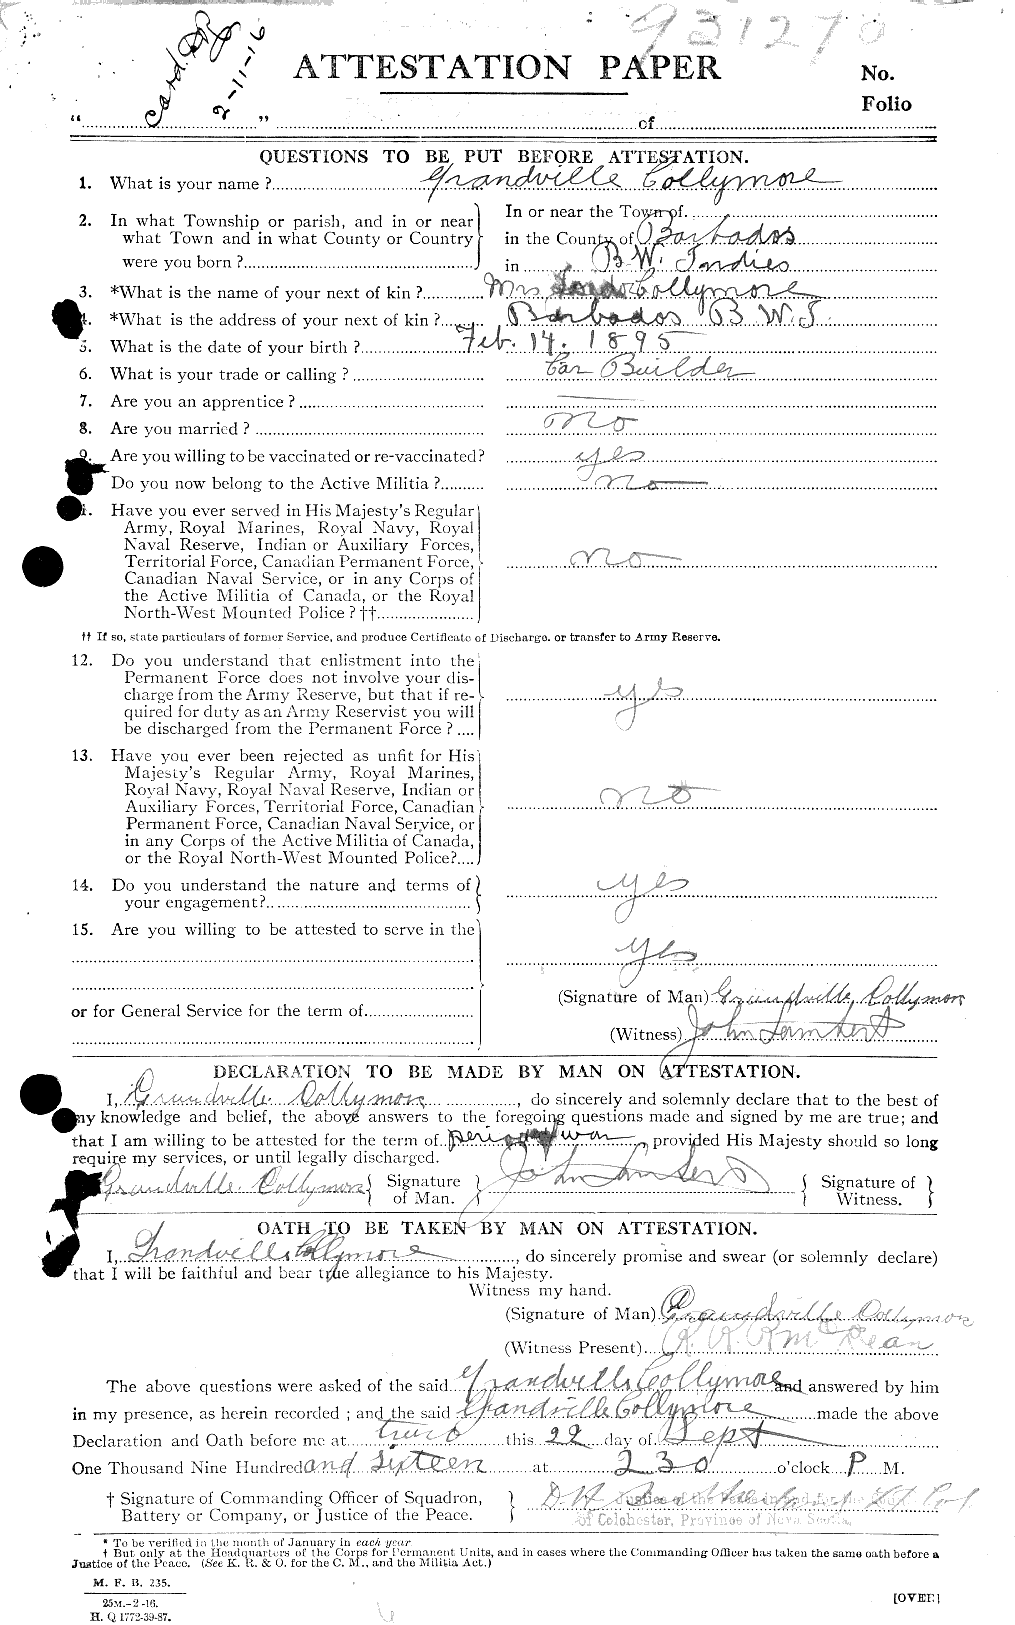 Personnel Records of the First World War - CEF 040755a